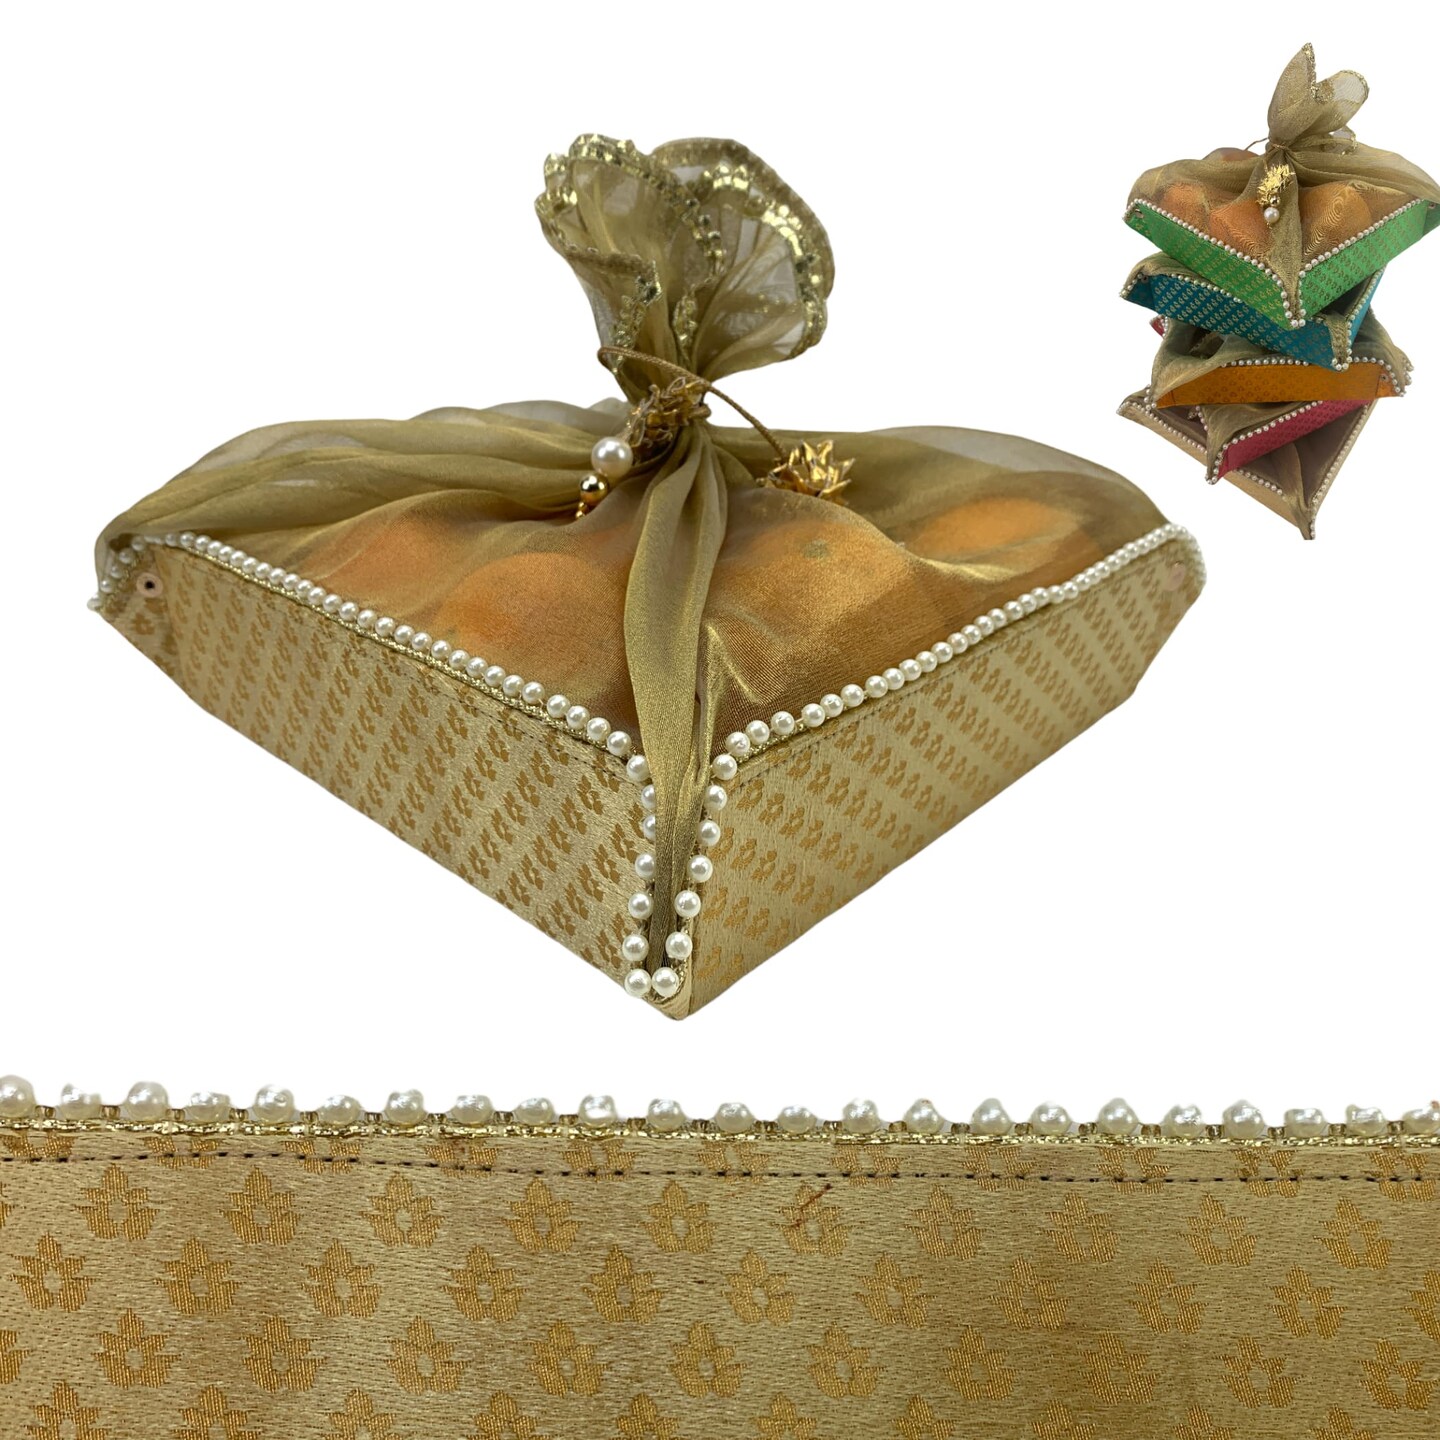 Buy Baby Shower Return Gifts Online at Lowest Prices in India @Puja N  Pujari.